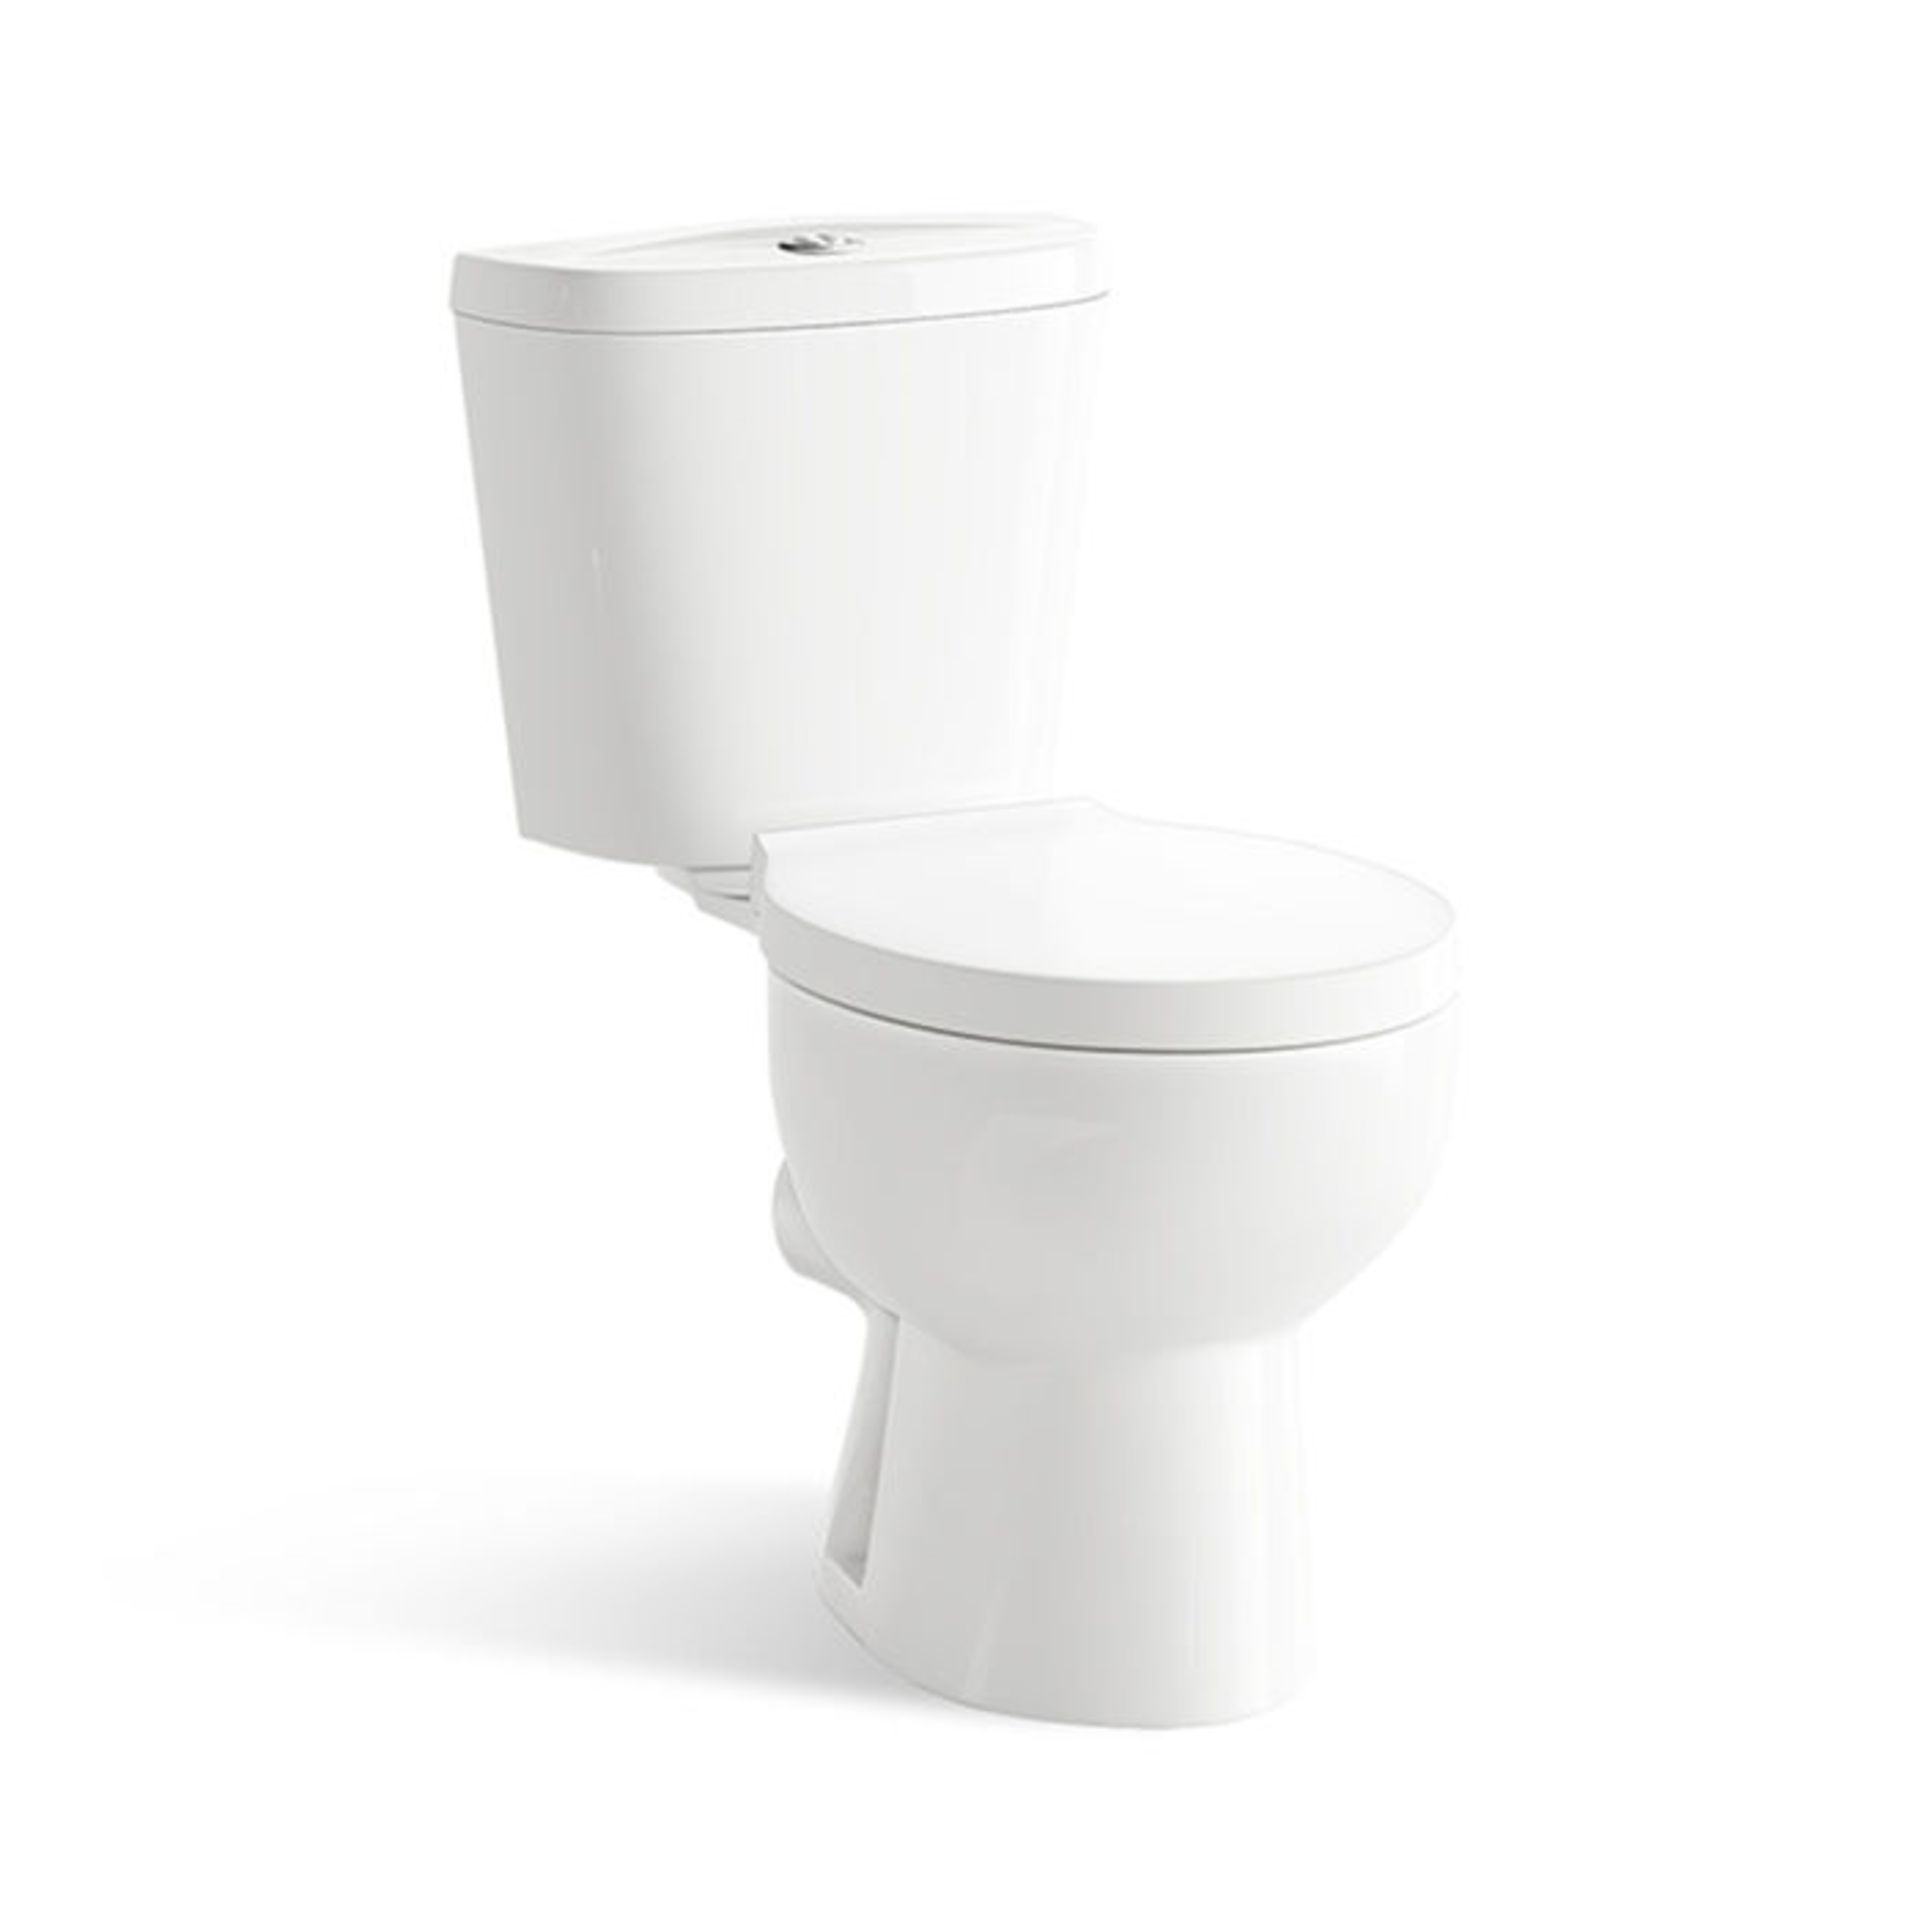 (MW34) Quartz Close Coupled Toilet We love this because it is simply great value! Made from White